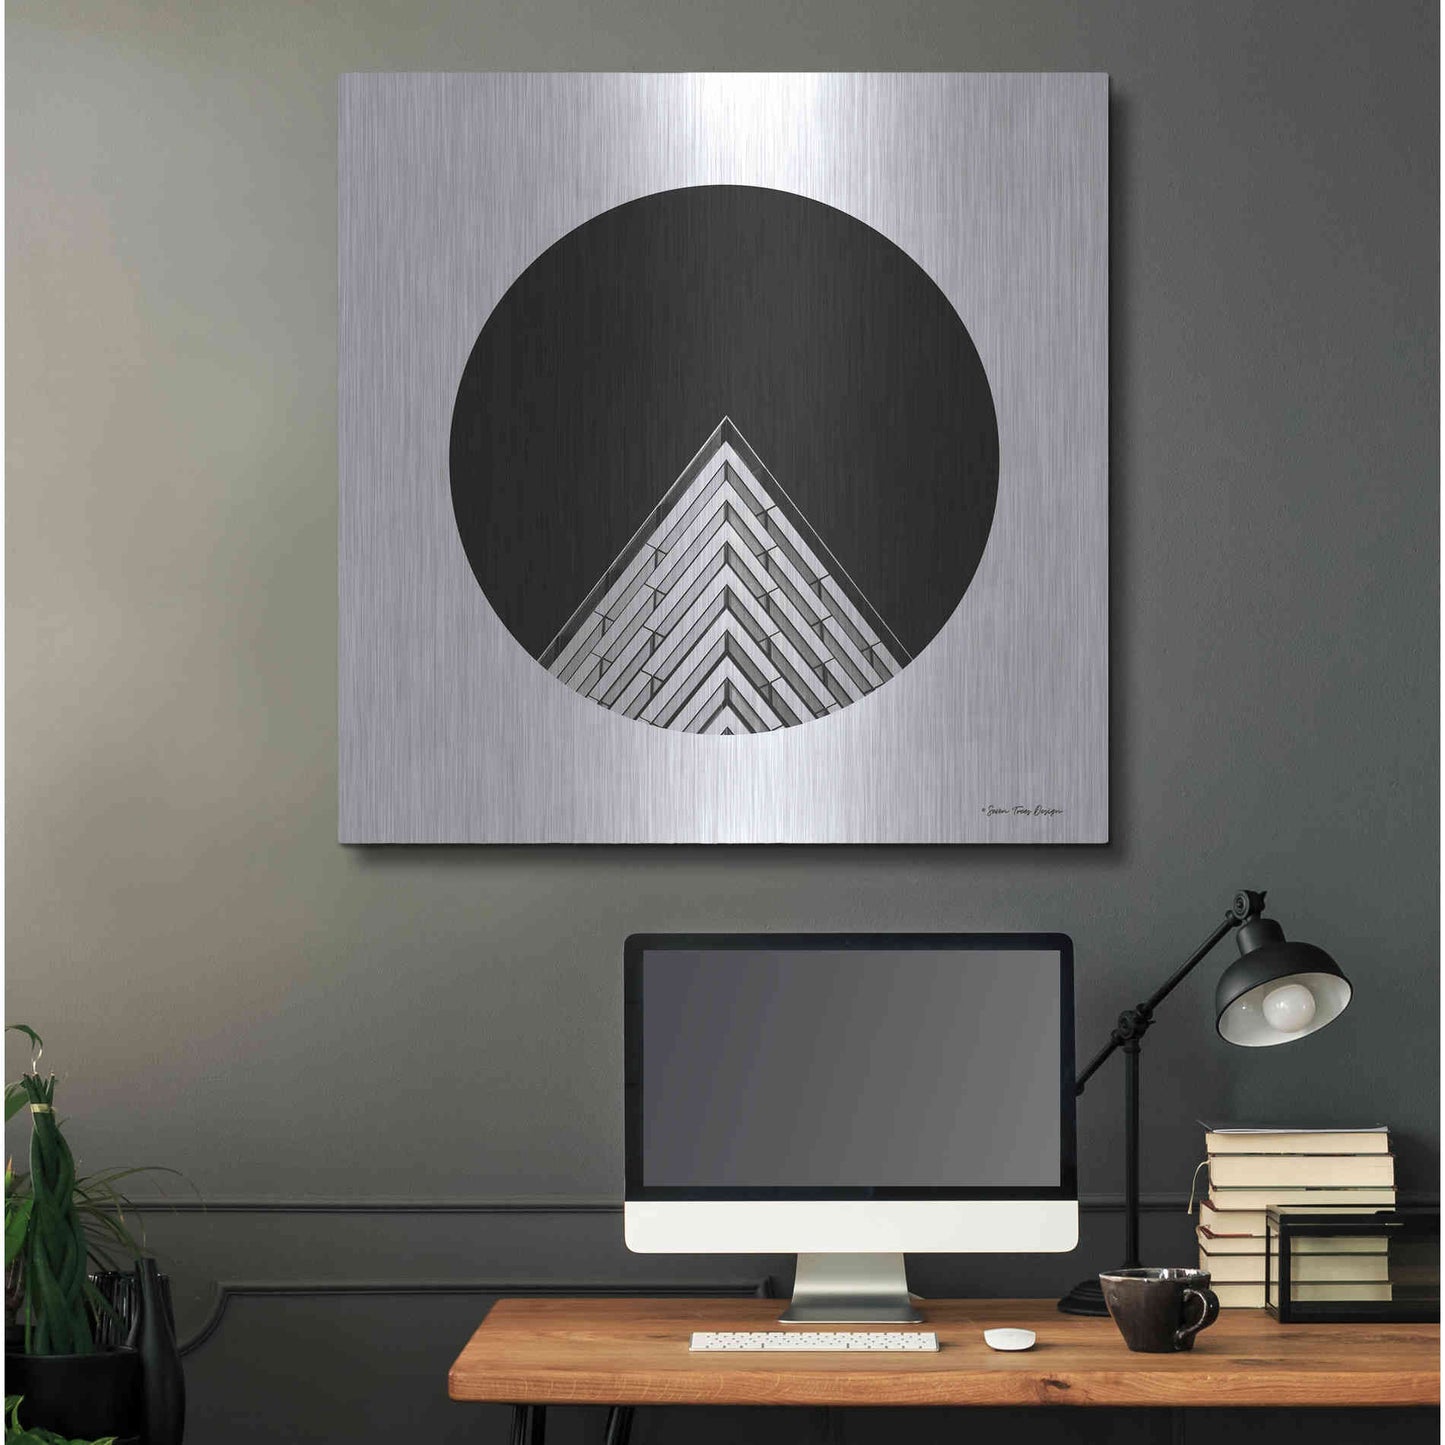 Luxe Metal Art 'Triangular Architecture' by Seven Trees Design, Metal Wall Art,36x36